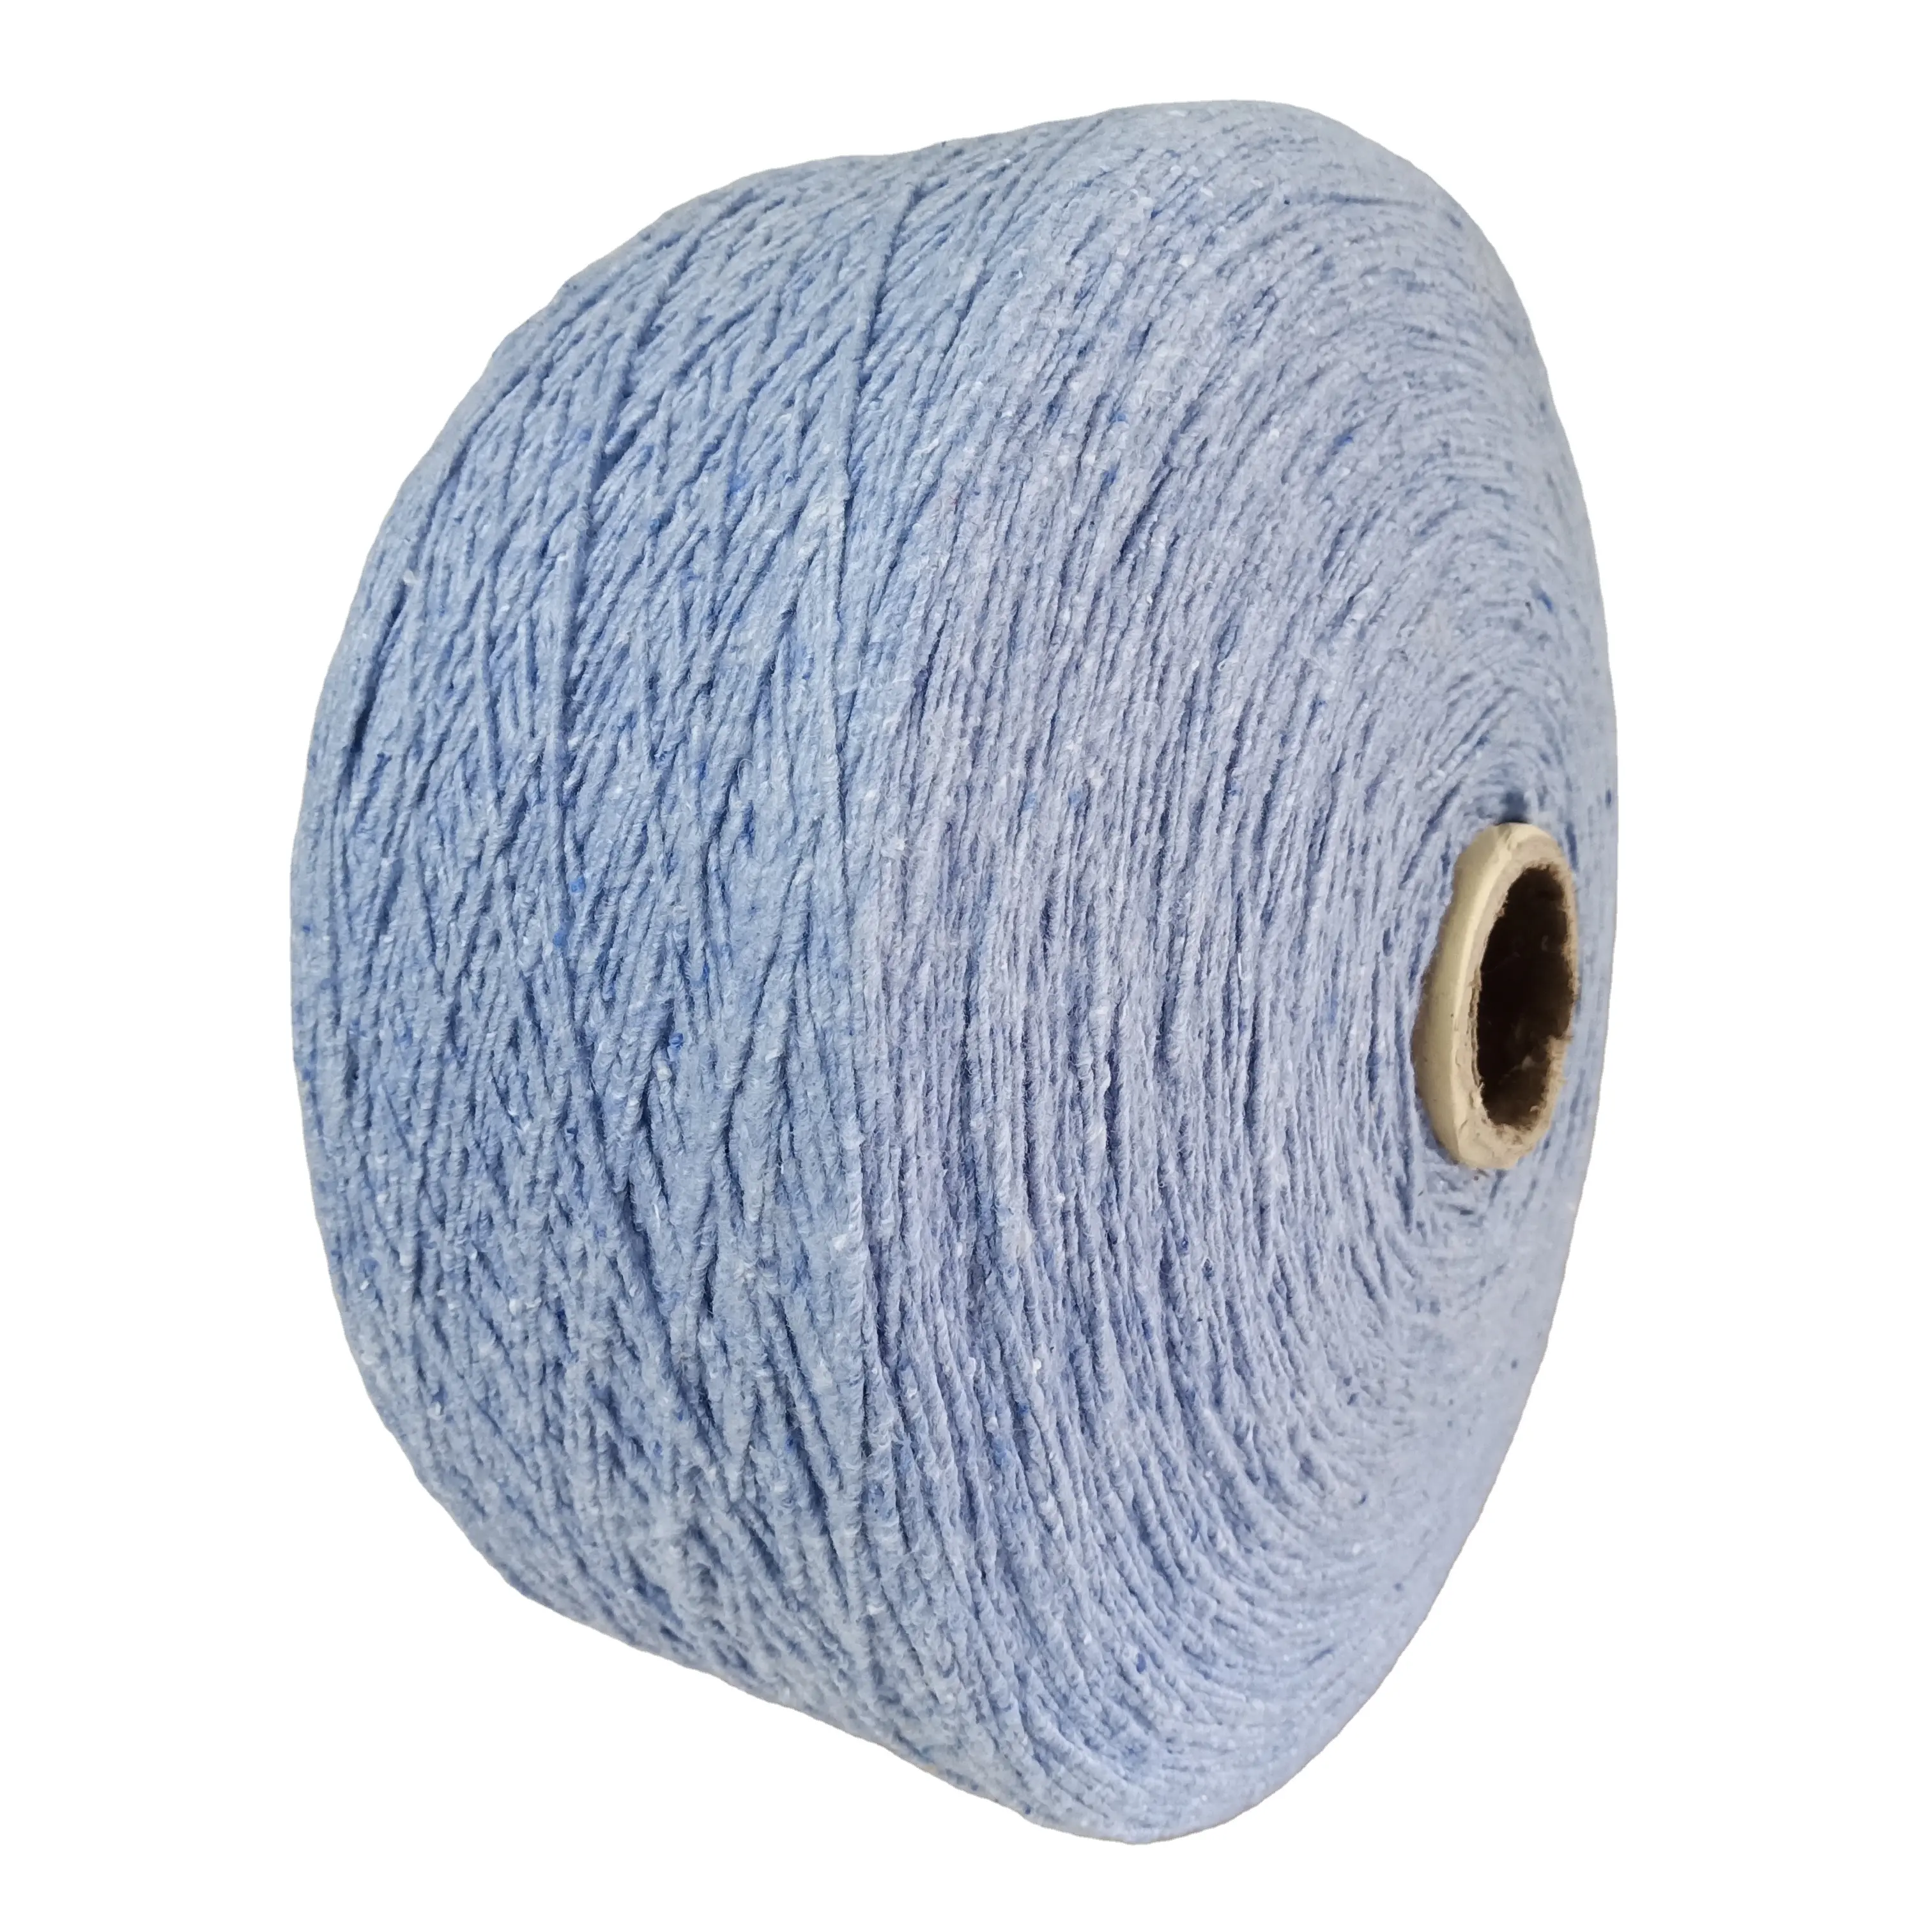 Low Price Regenerated Cotton Polyester Blended Yarn Nm1/1 or Nm1.3 Algodon Cotton Thick Yarn for Mop or Blanket